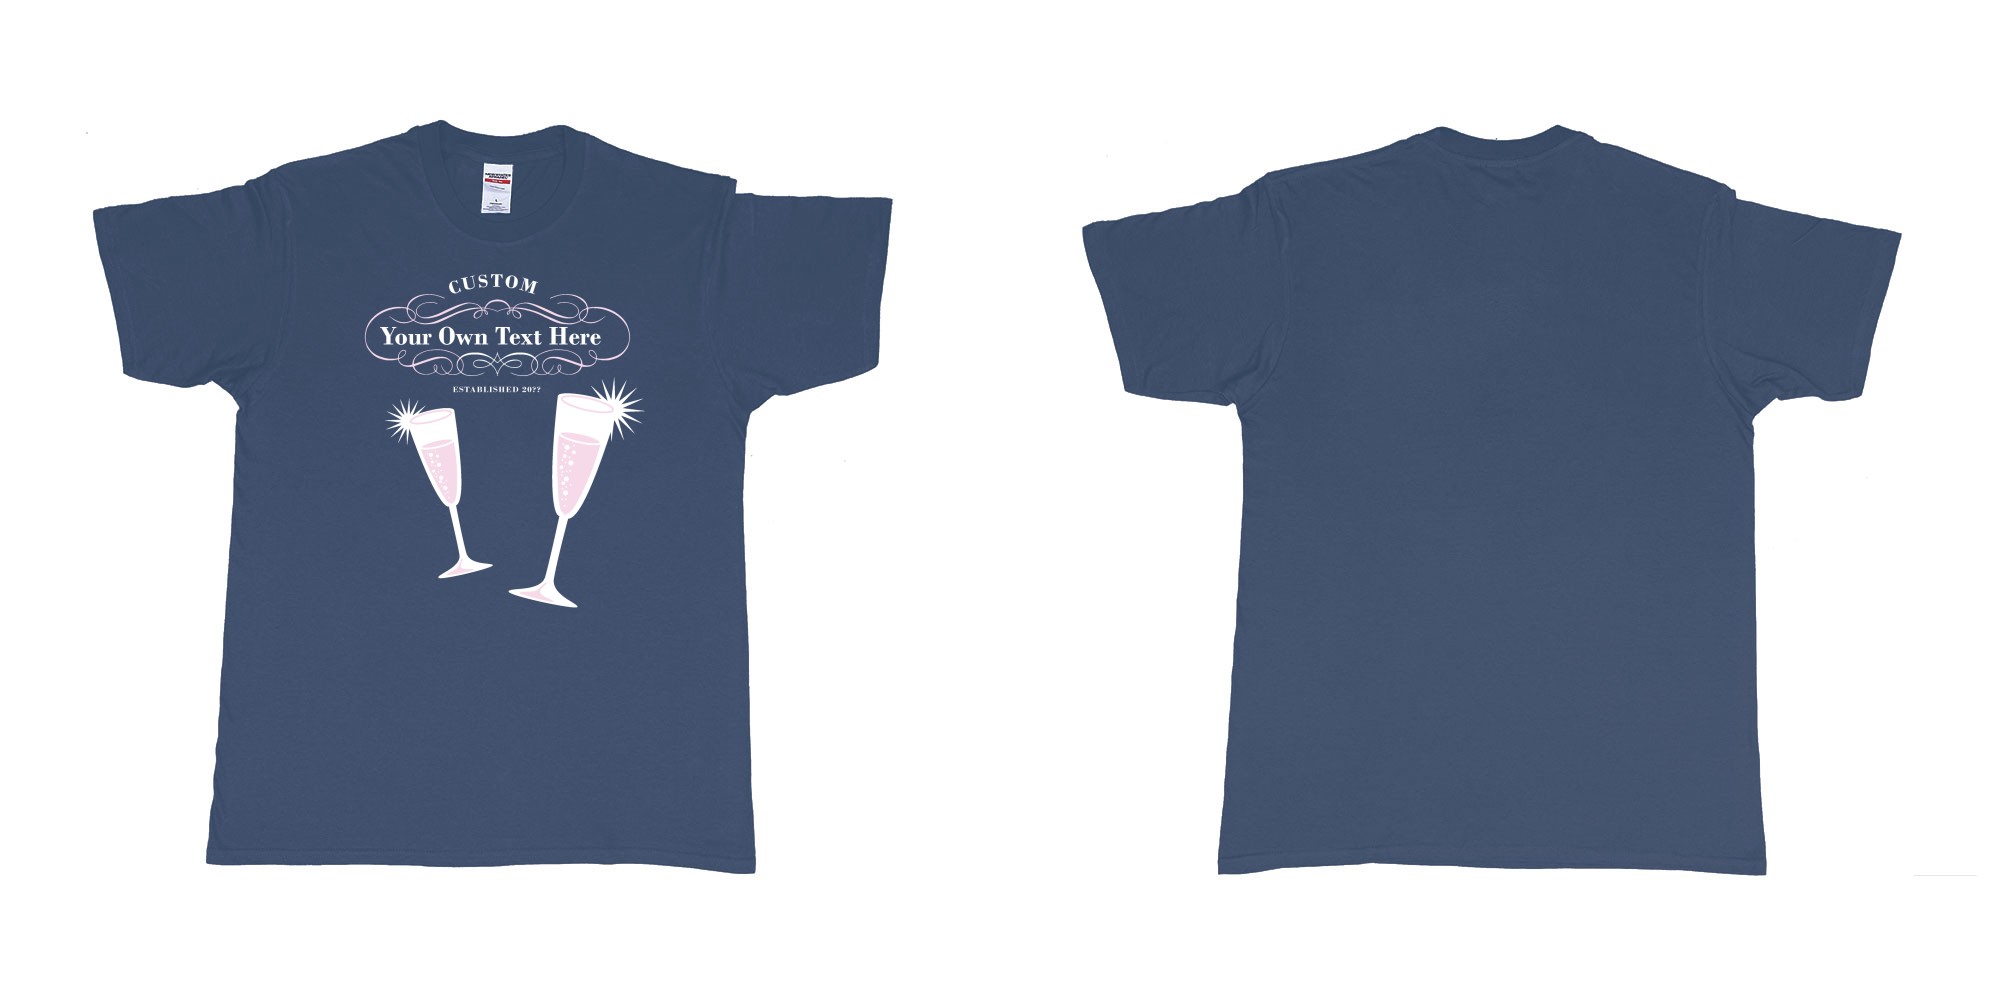 Custom tshirt design laurent perrier champagne logo in fabric color navy choice your own text made in Bali by The Pirate Way